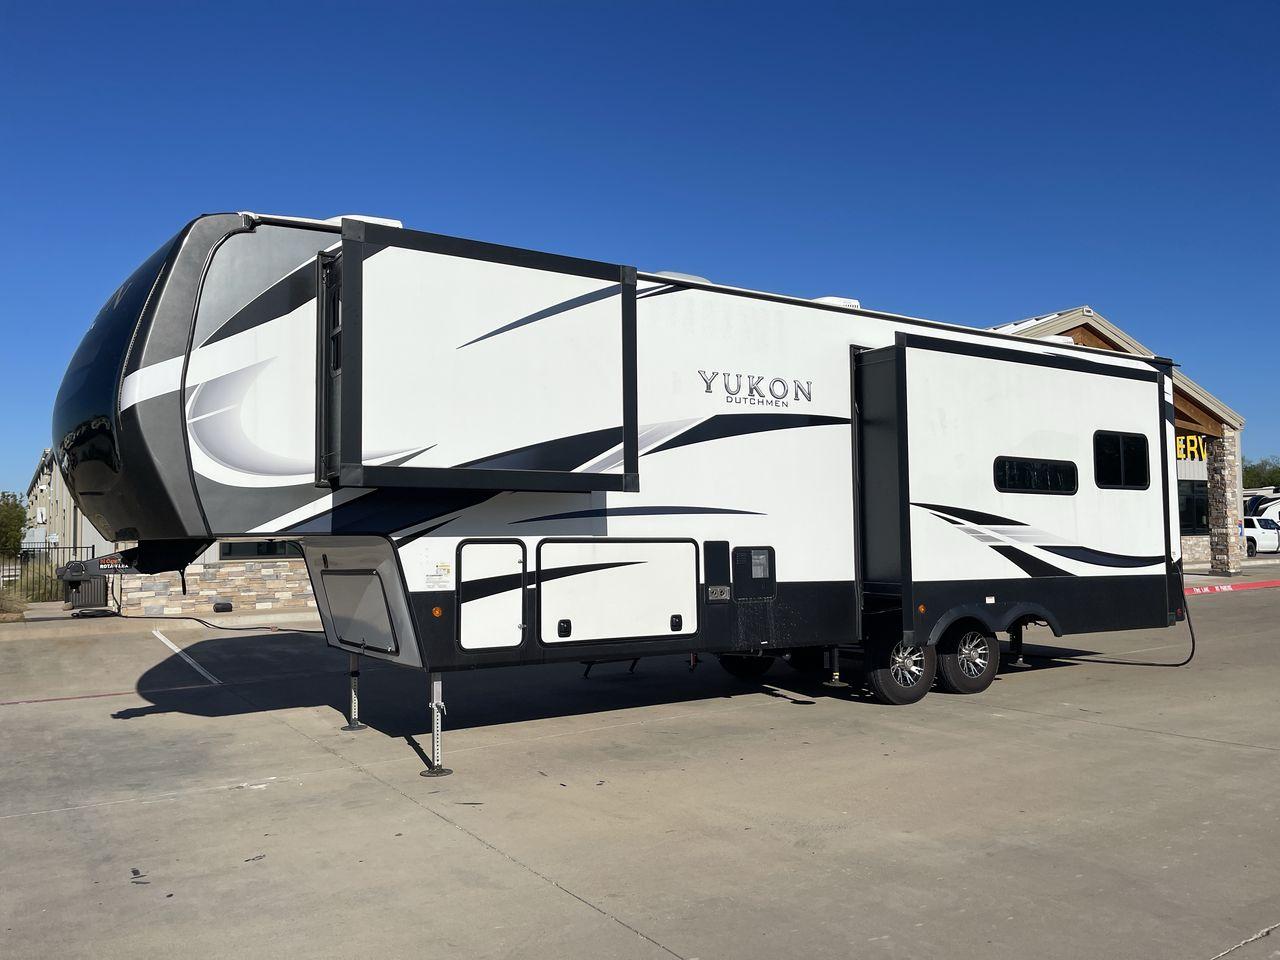 2022 KEYSTONE YUKON 320RL (4YDFYKR28NZ) , Length: 36.5 ft. | Dry Weight: 12,360 lbs. | Slides: 3 transmission, located at 4319 N Main Street, Cleburne, TX, 76033, (817) 221-0660, 32.435829, -97.384178 - A high-end fifth wheel that blends elegance and practicality for an unmatched camping experience is the 2022 Keystone Yukon 320RL. This model provides generous living quarters while maintaining exceptional durability. It measures 36.5 feet in length and has a dry weight of 12,360 pounds. The Yukon 3 - Photo #24